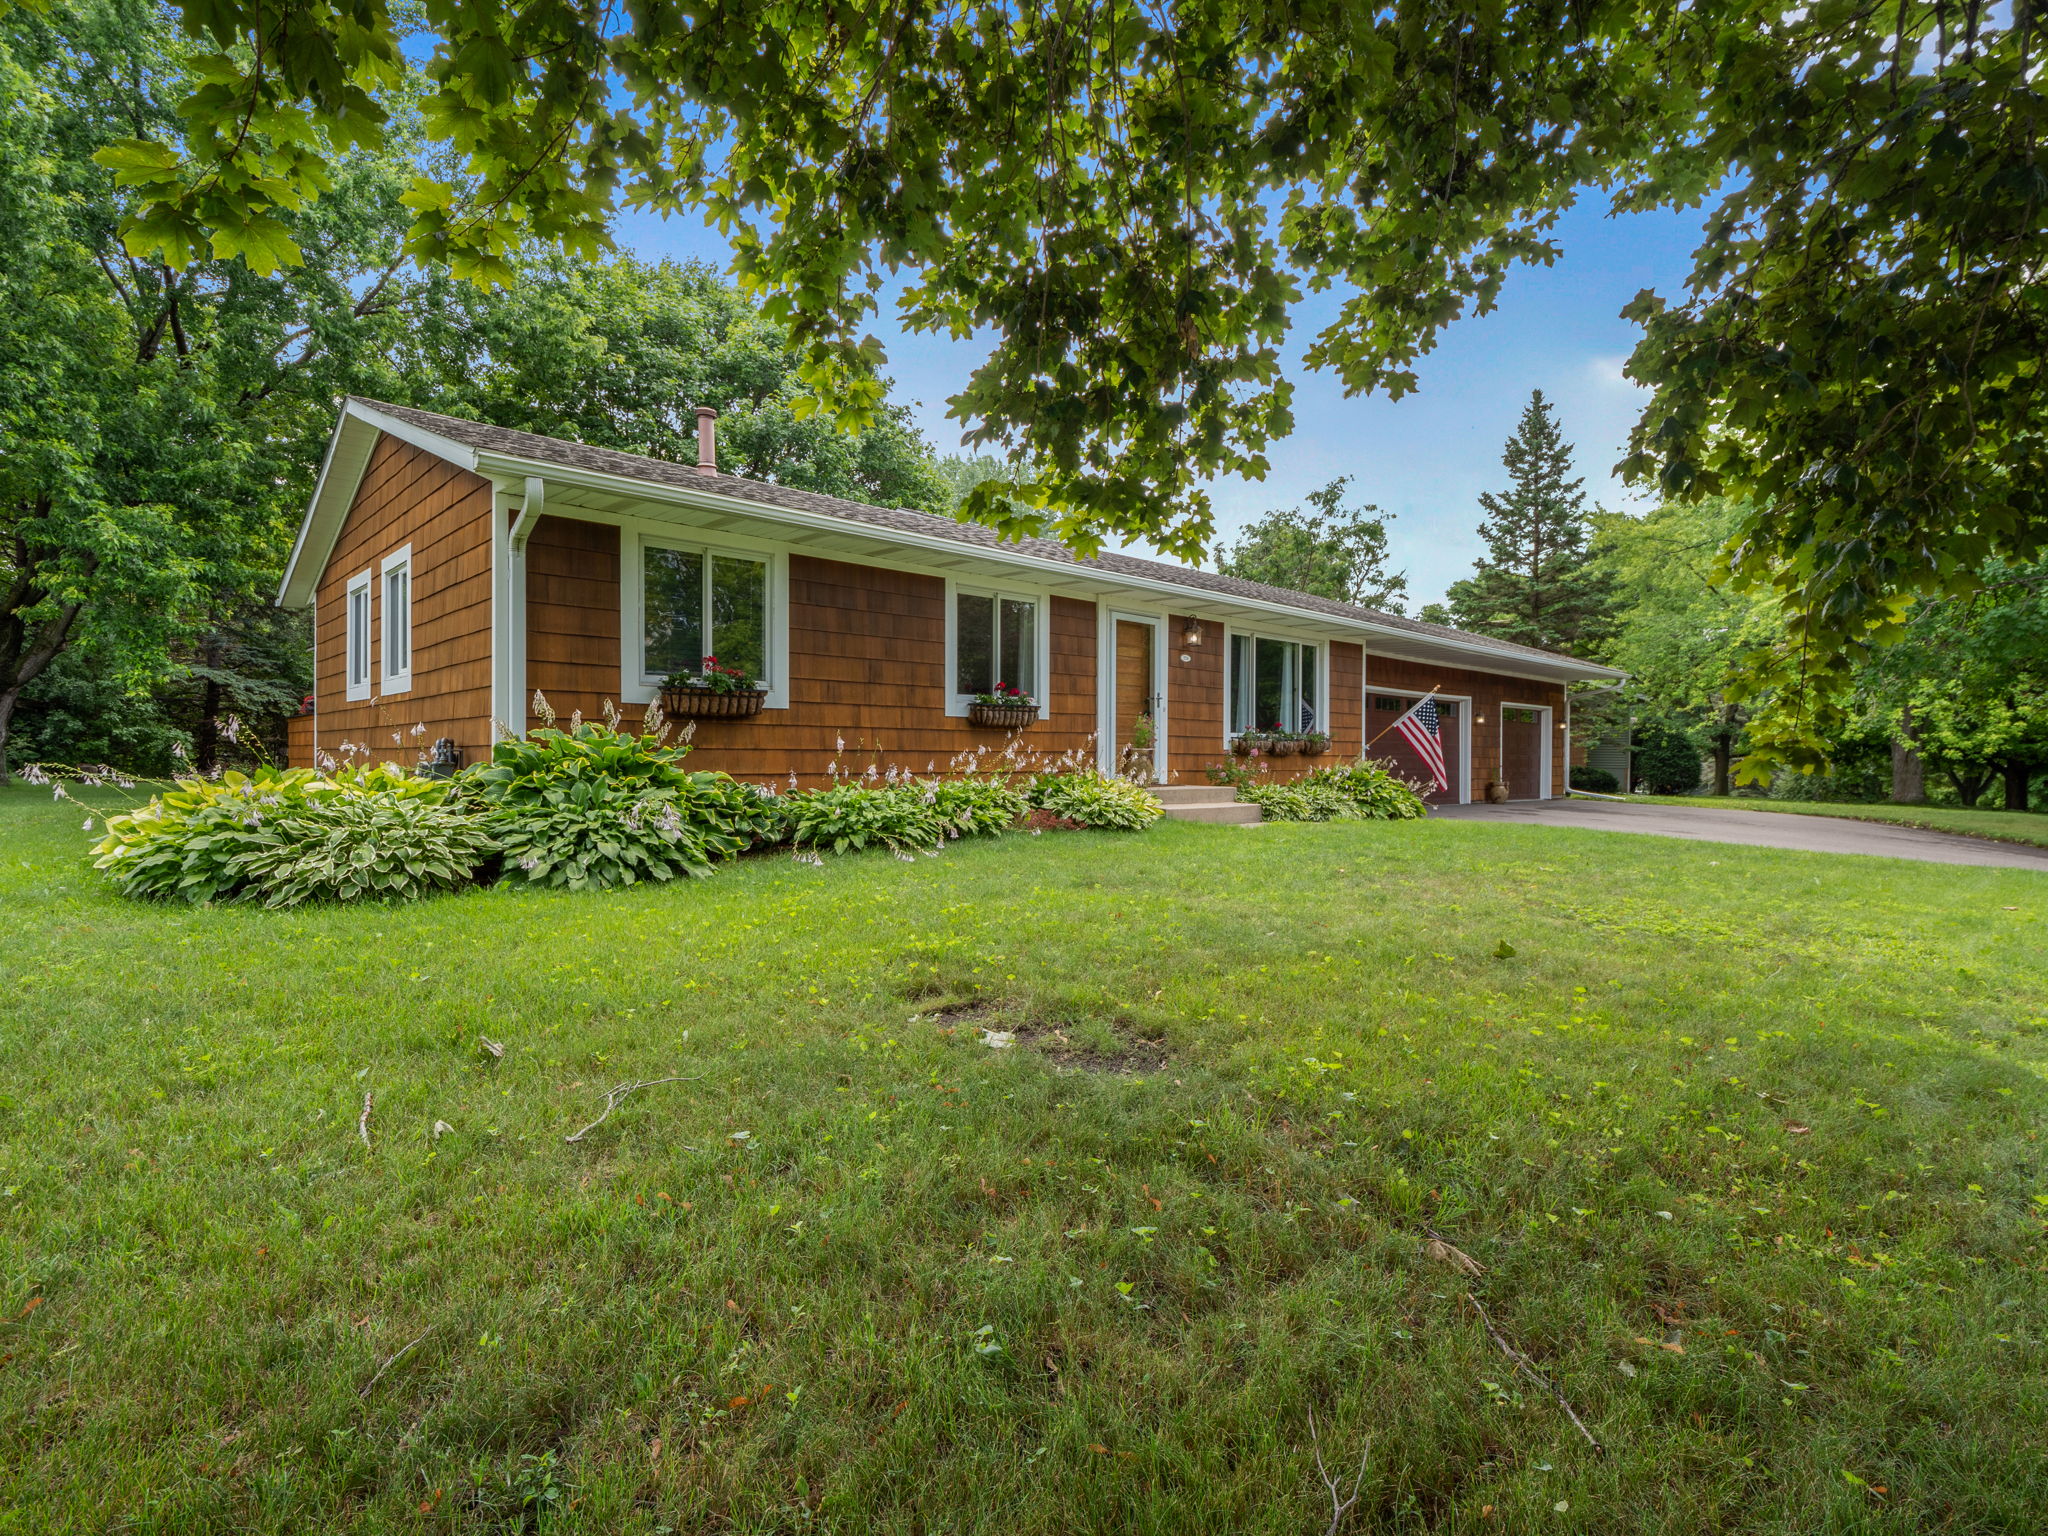  2750 Oliver Lane North, Plymouth, MN 55447, US